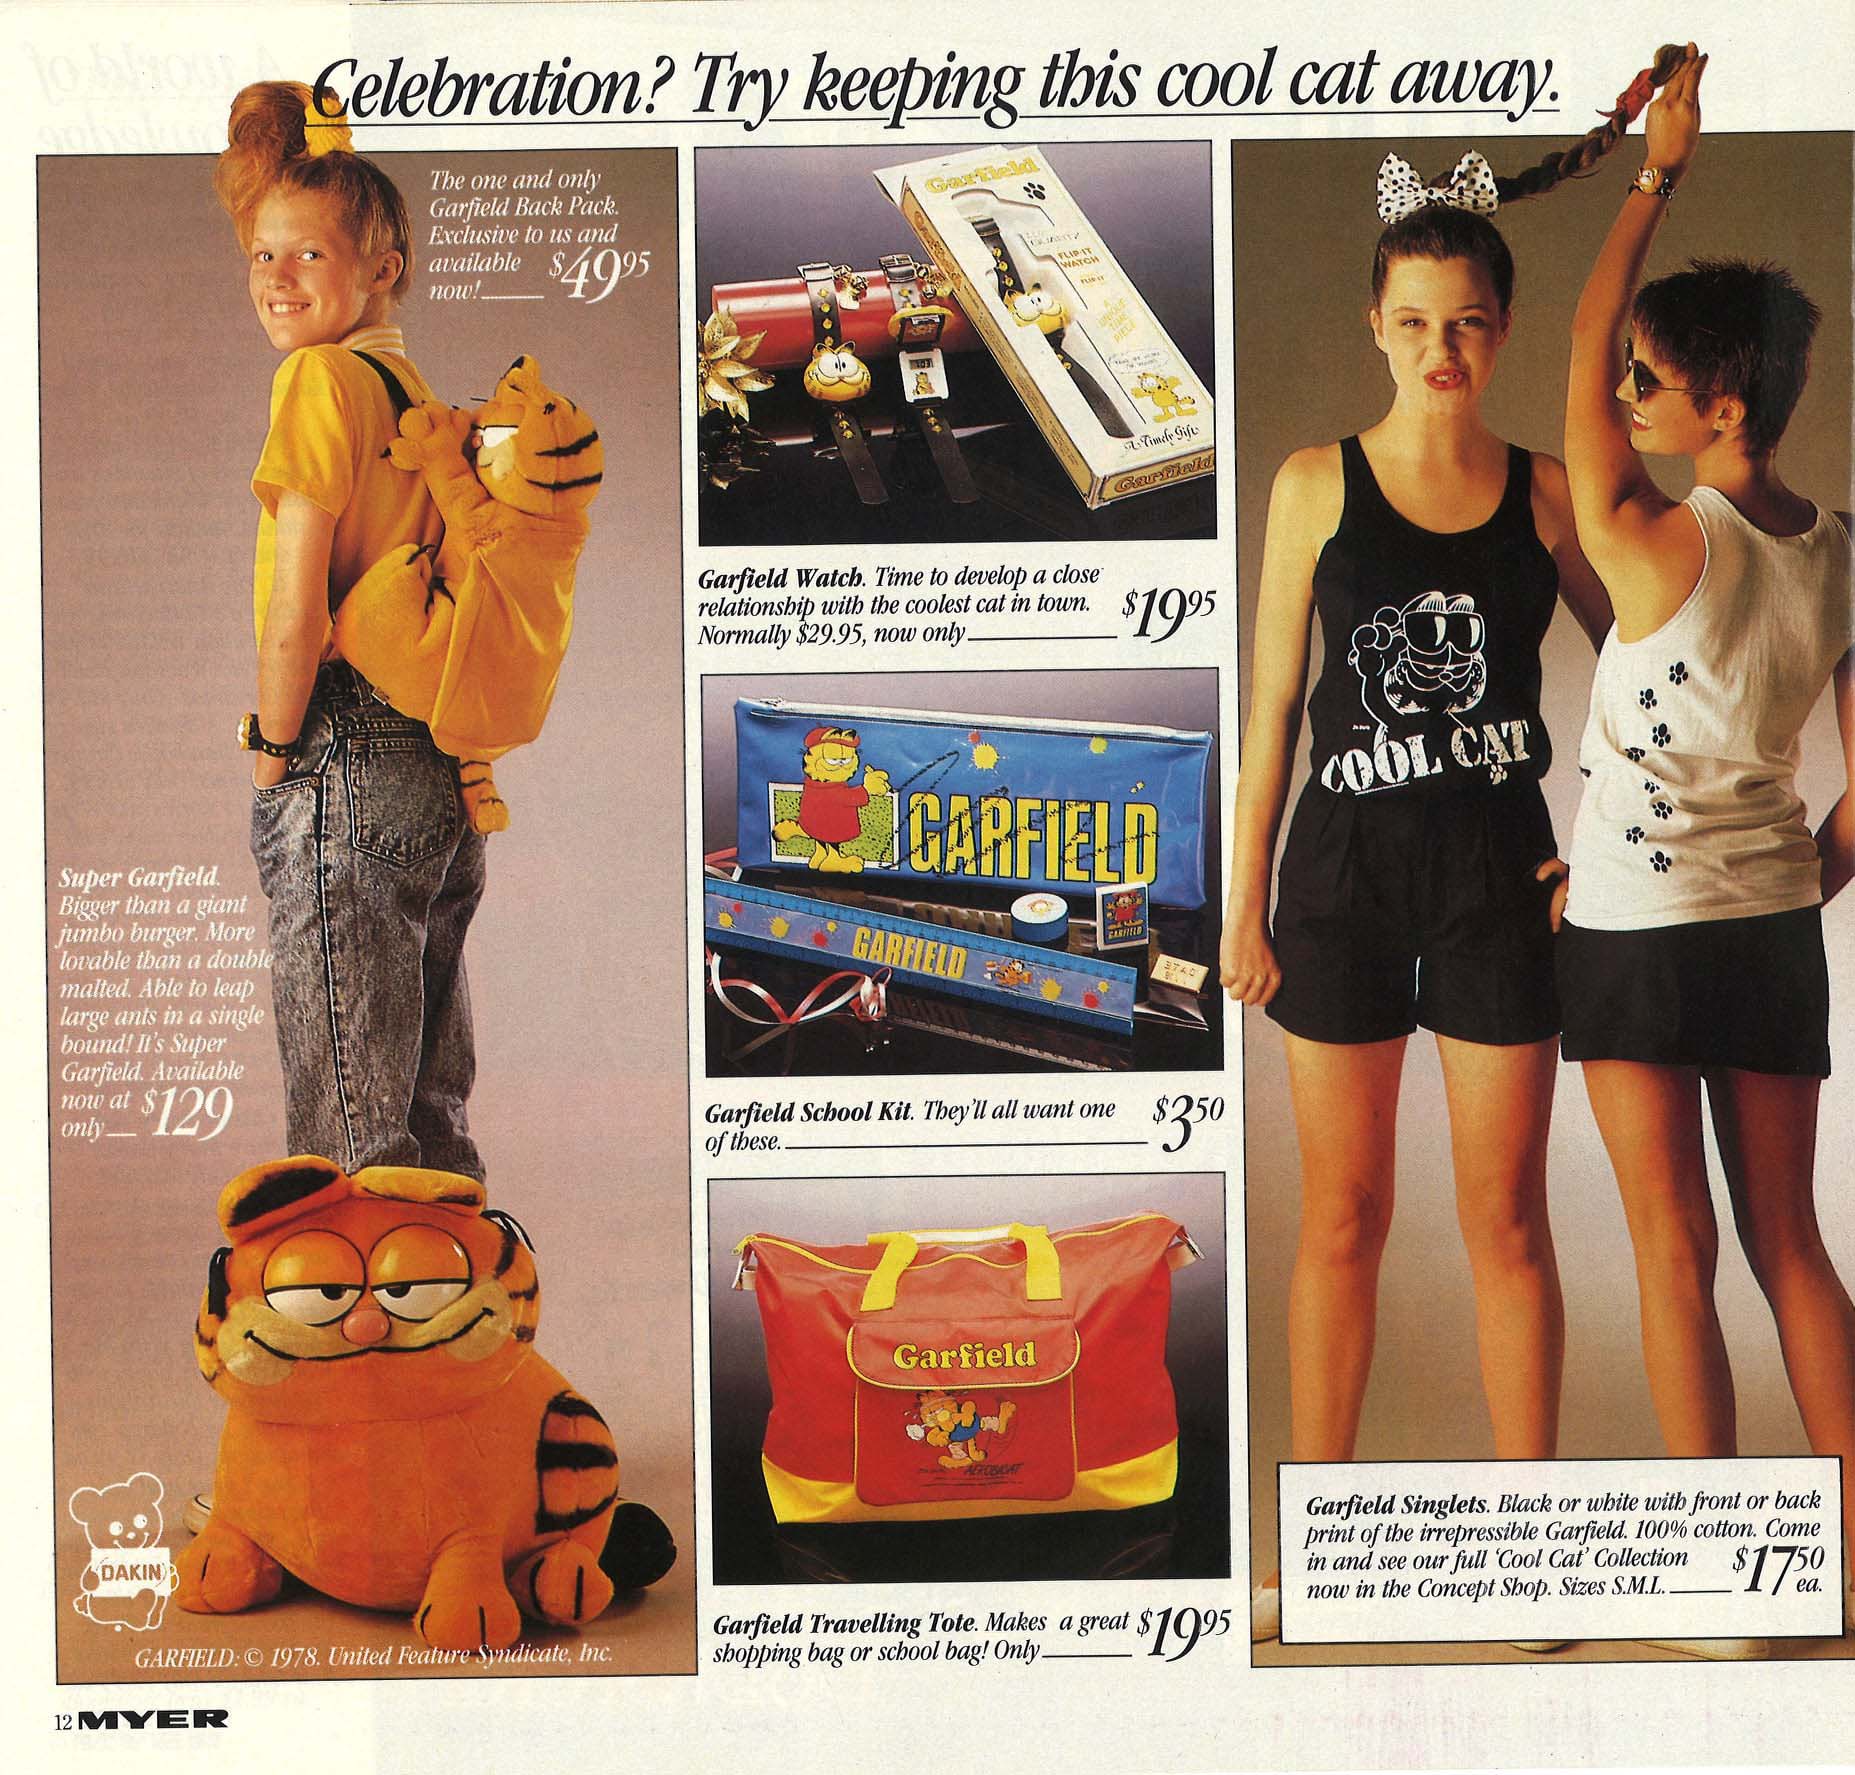 Reviewing Aussie Christmas Catalogues From the 1980s & 1990s — The Latch